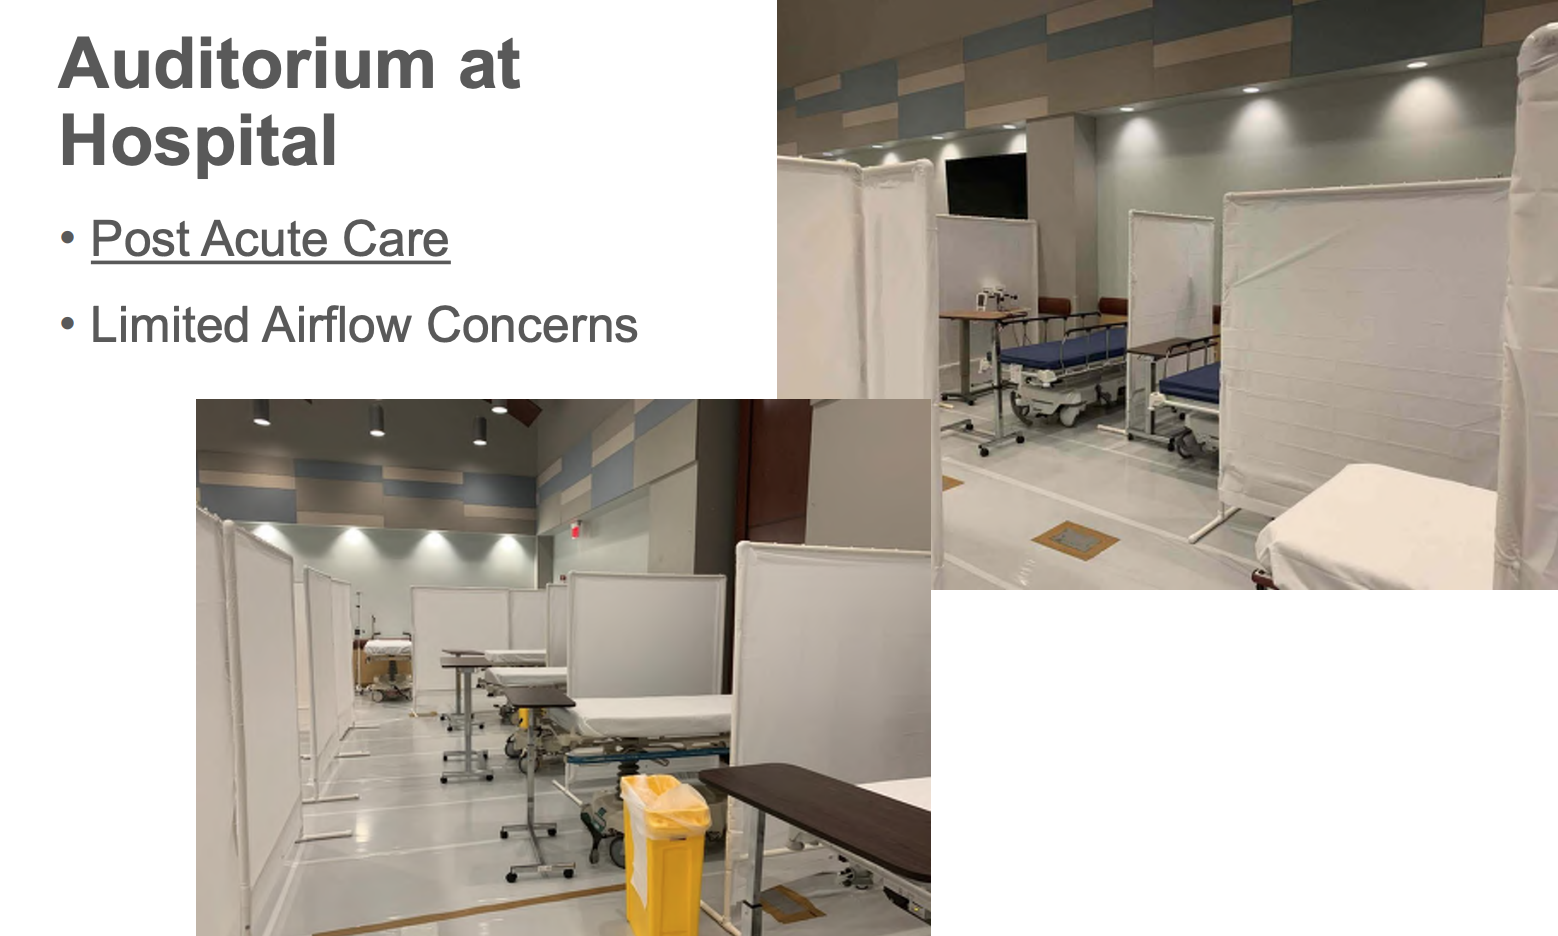 Use of hospital auditorium for post-acute care